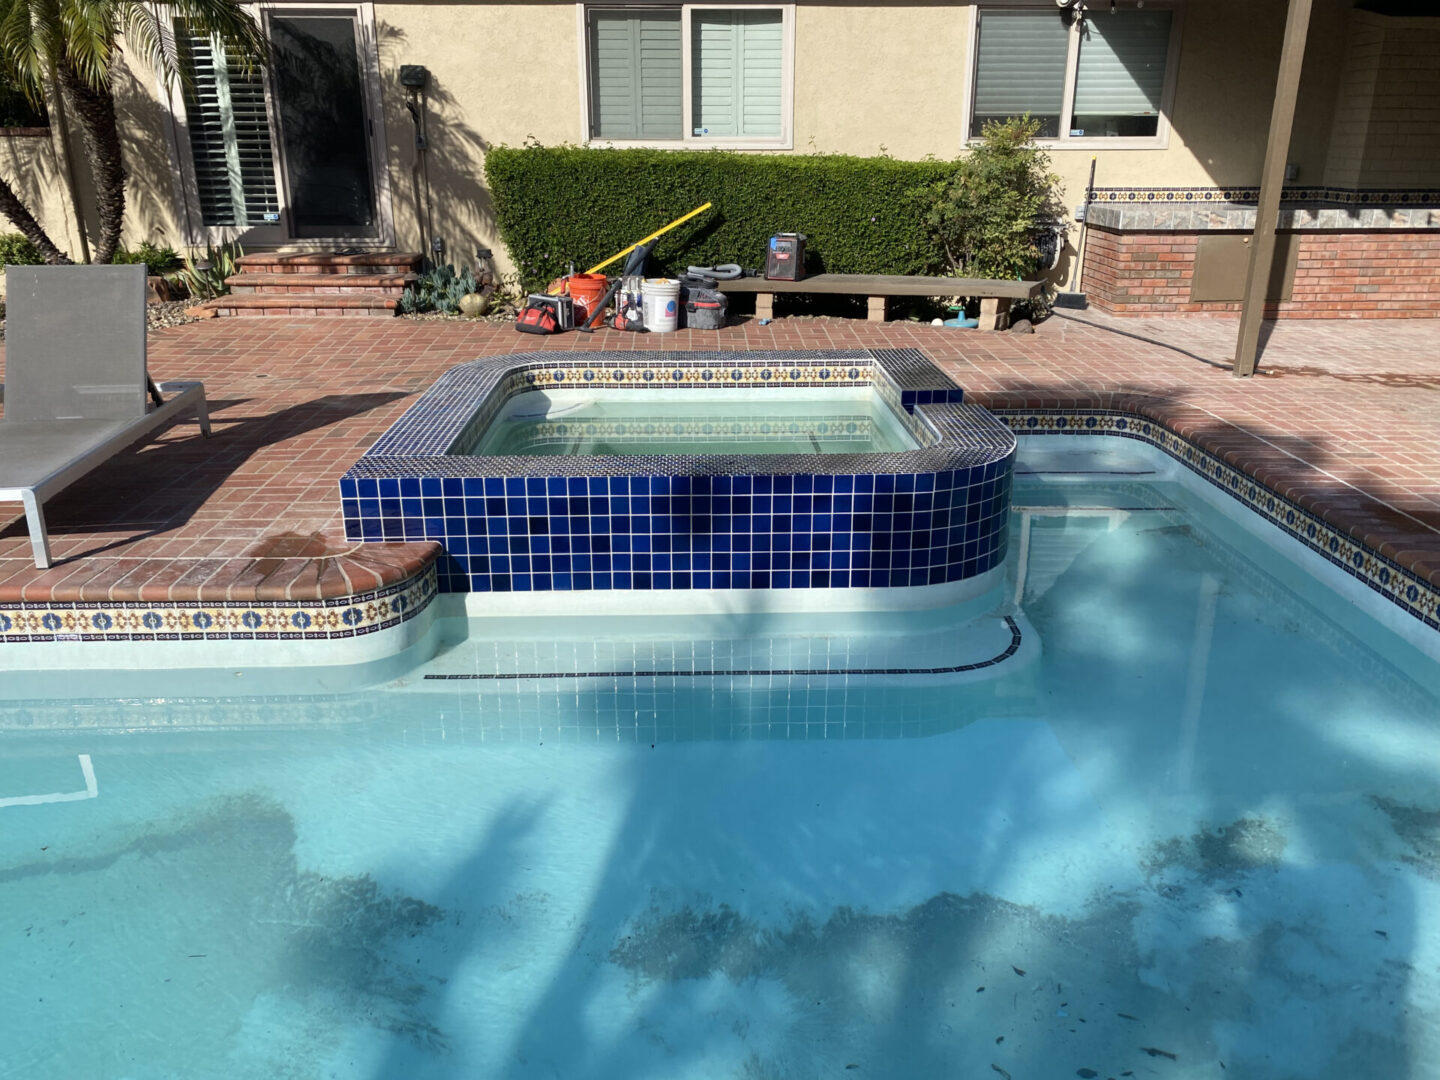 A pool with a blue tile surround and a bench in the background.